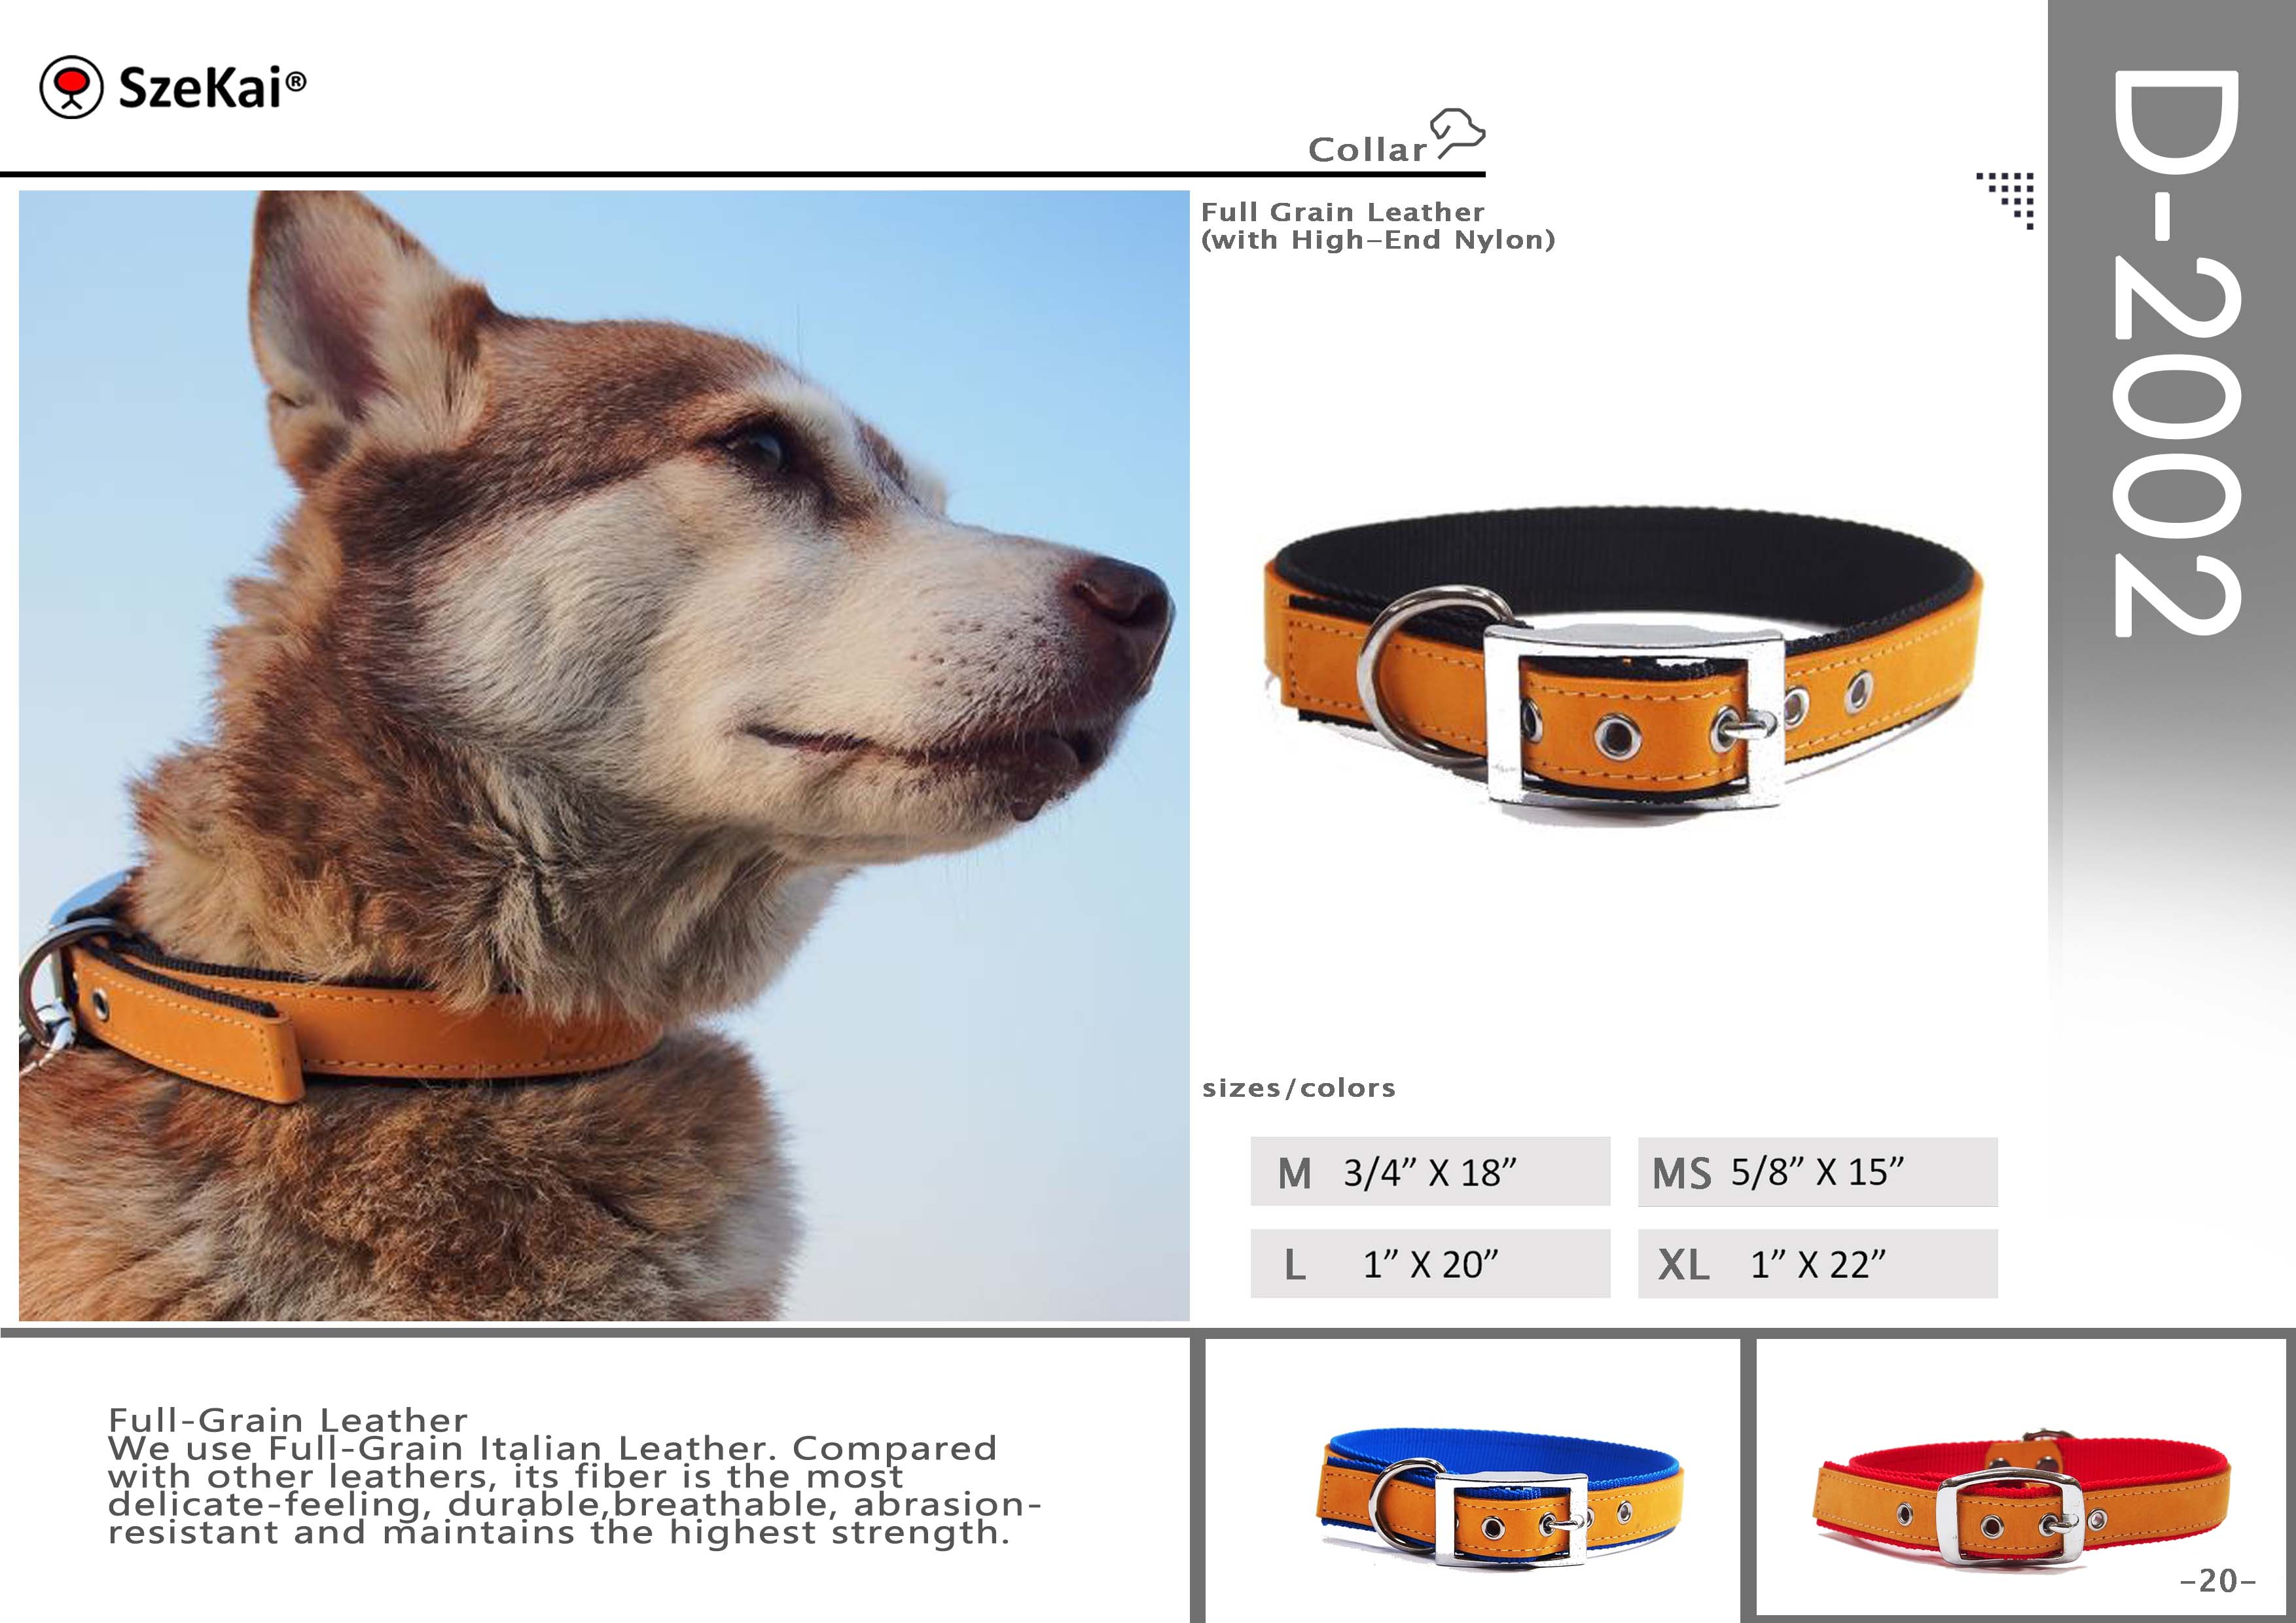 Full Grain Leather with High-End Nylon Collar